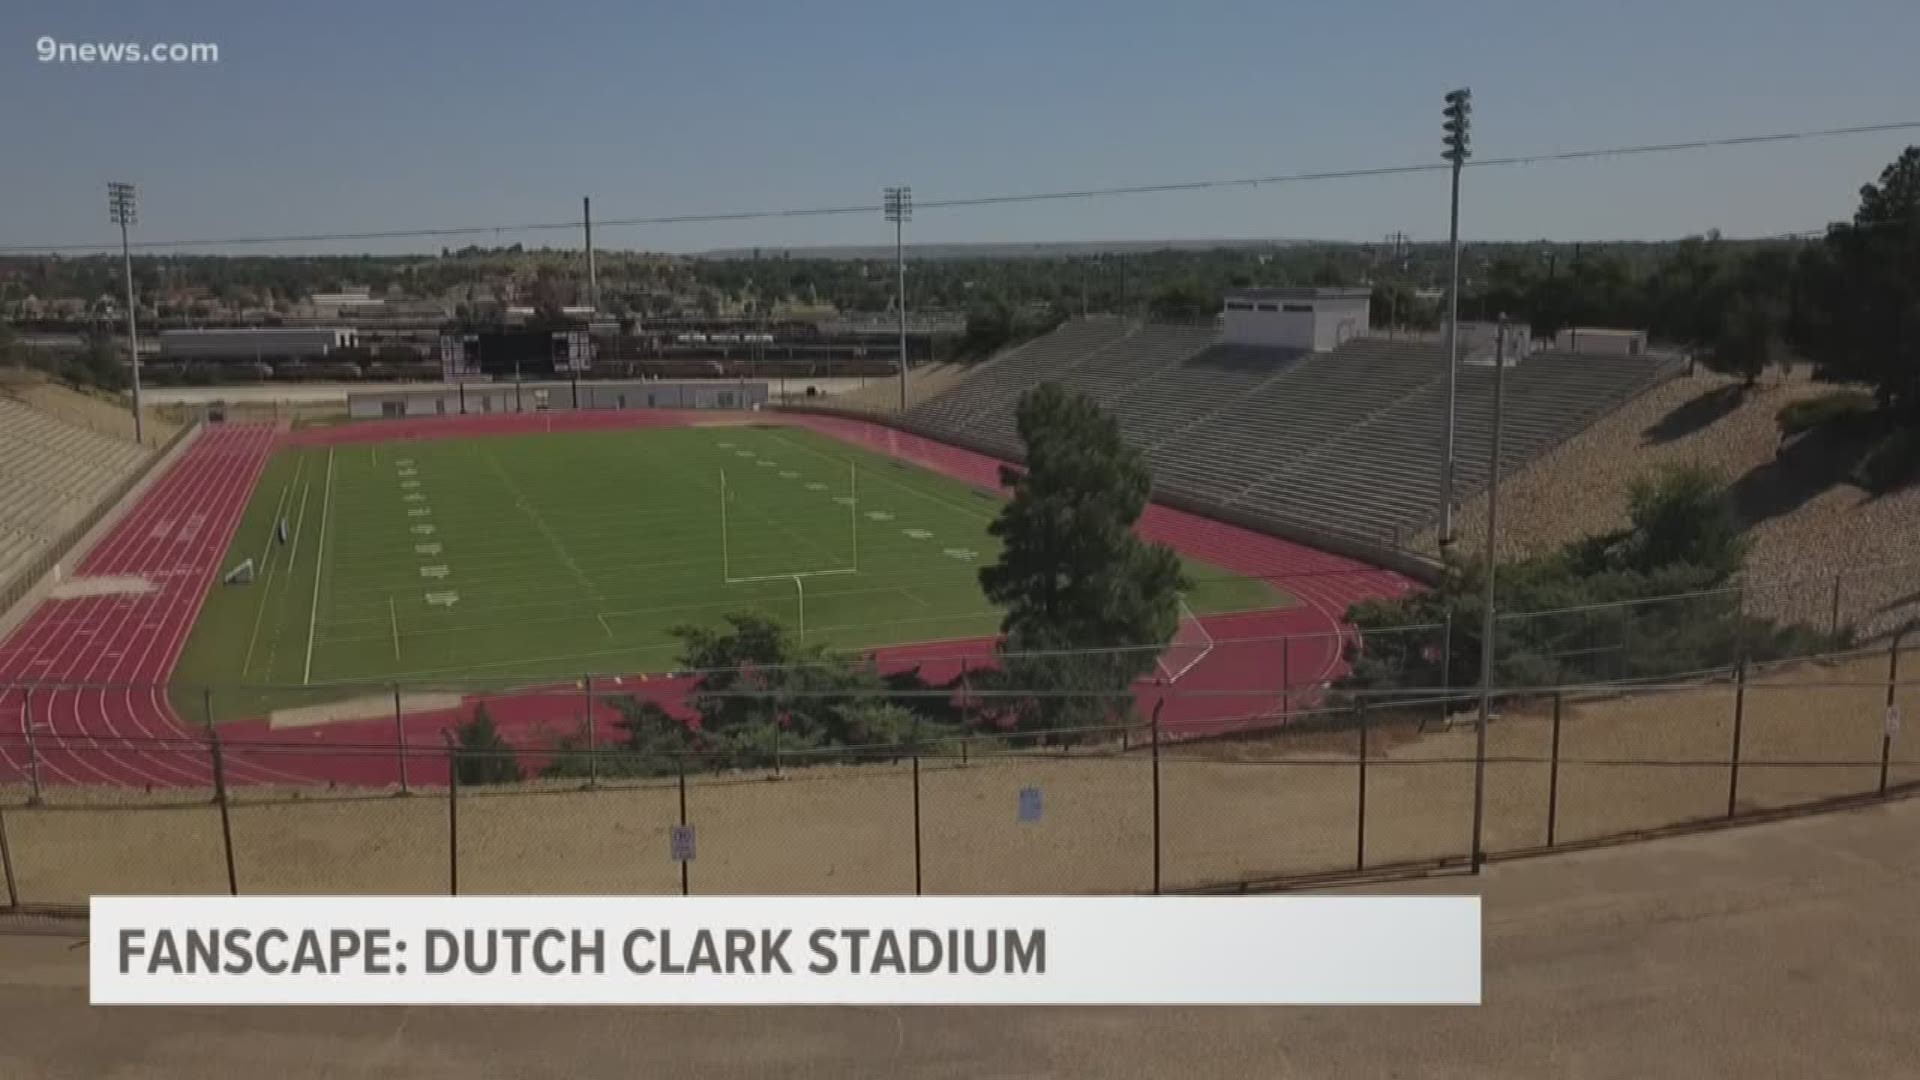 The first Fanscape feature of the 2019 summer takes us south to Dutch Clark Stadium in Pueblo.